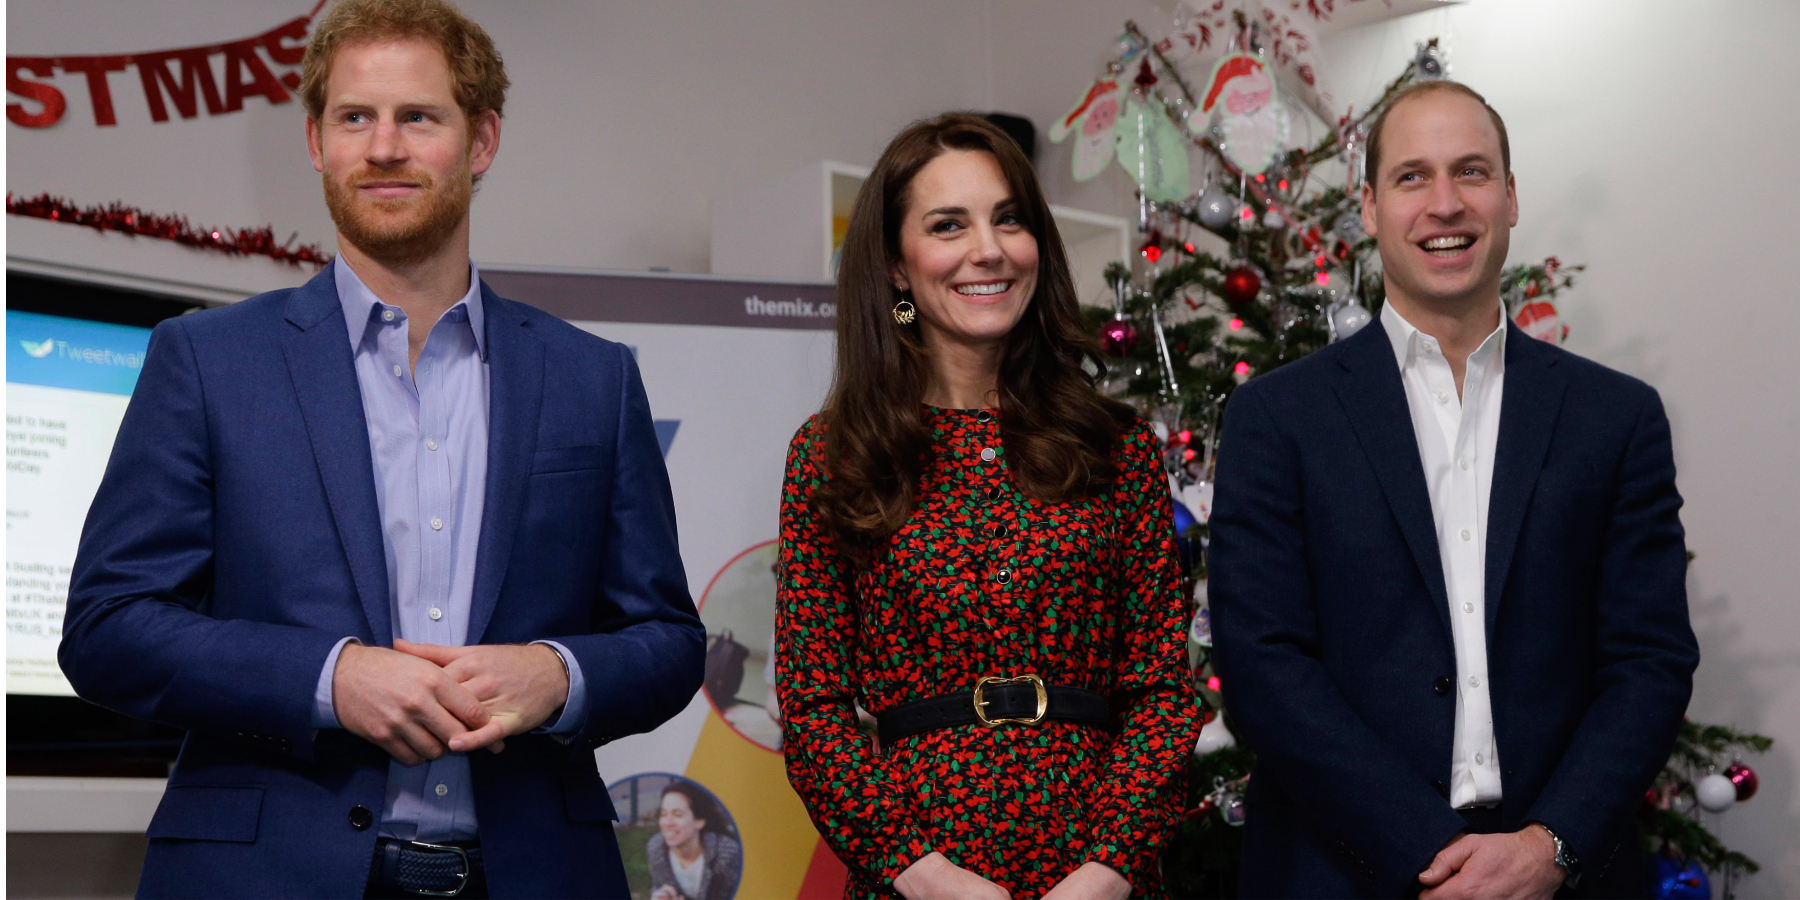 Prince Harry, Kate Middleton, and Prince William pose for a photograph on December 19, 2016 in London, England